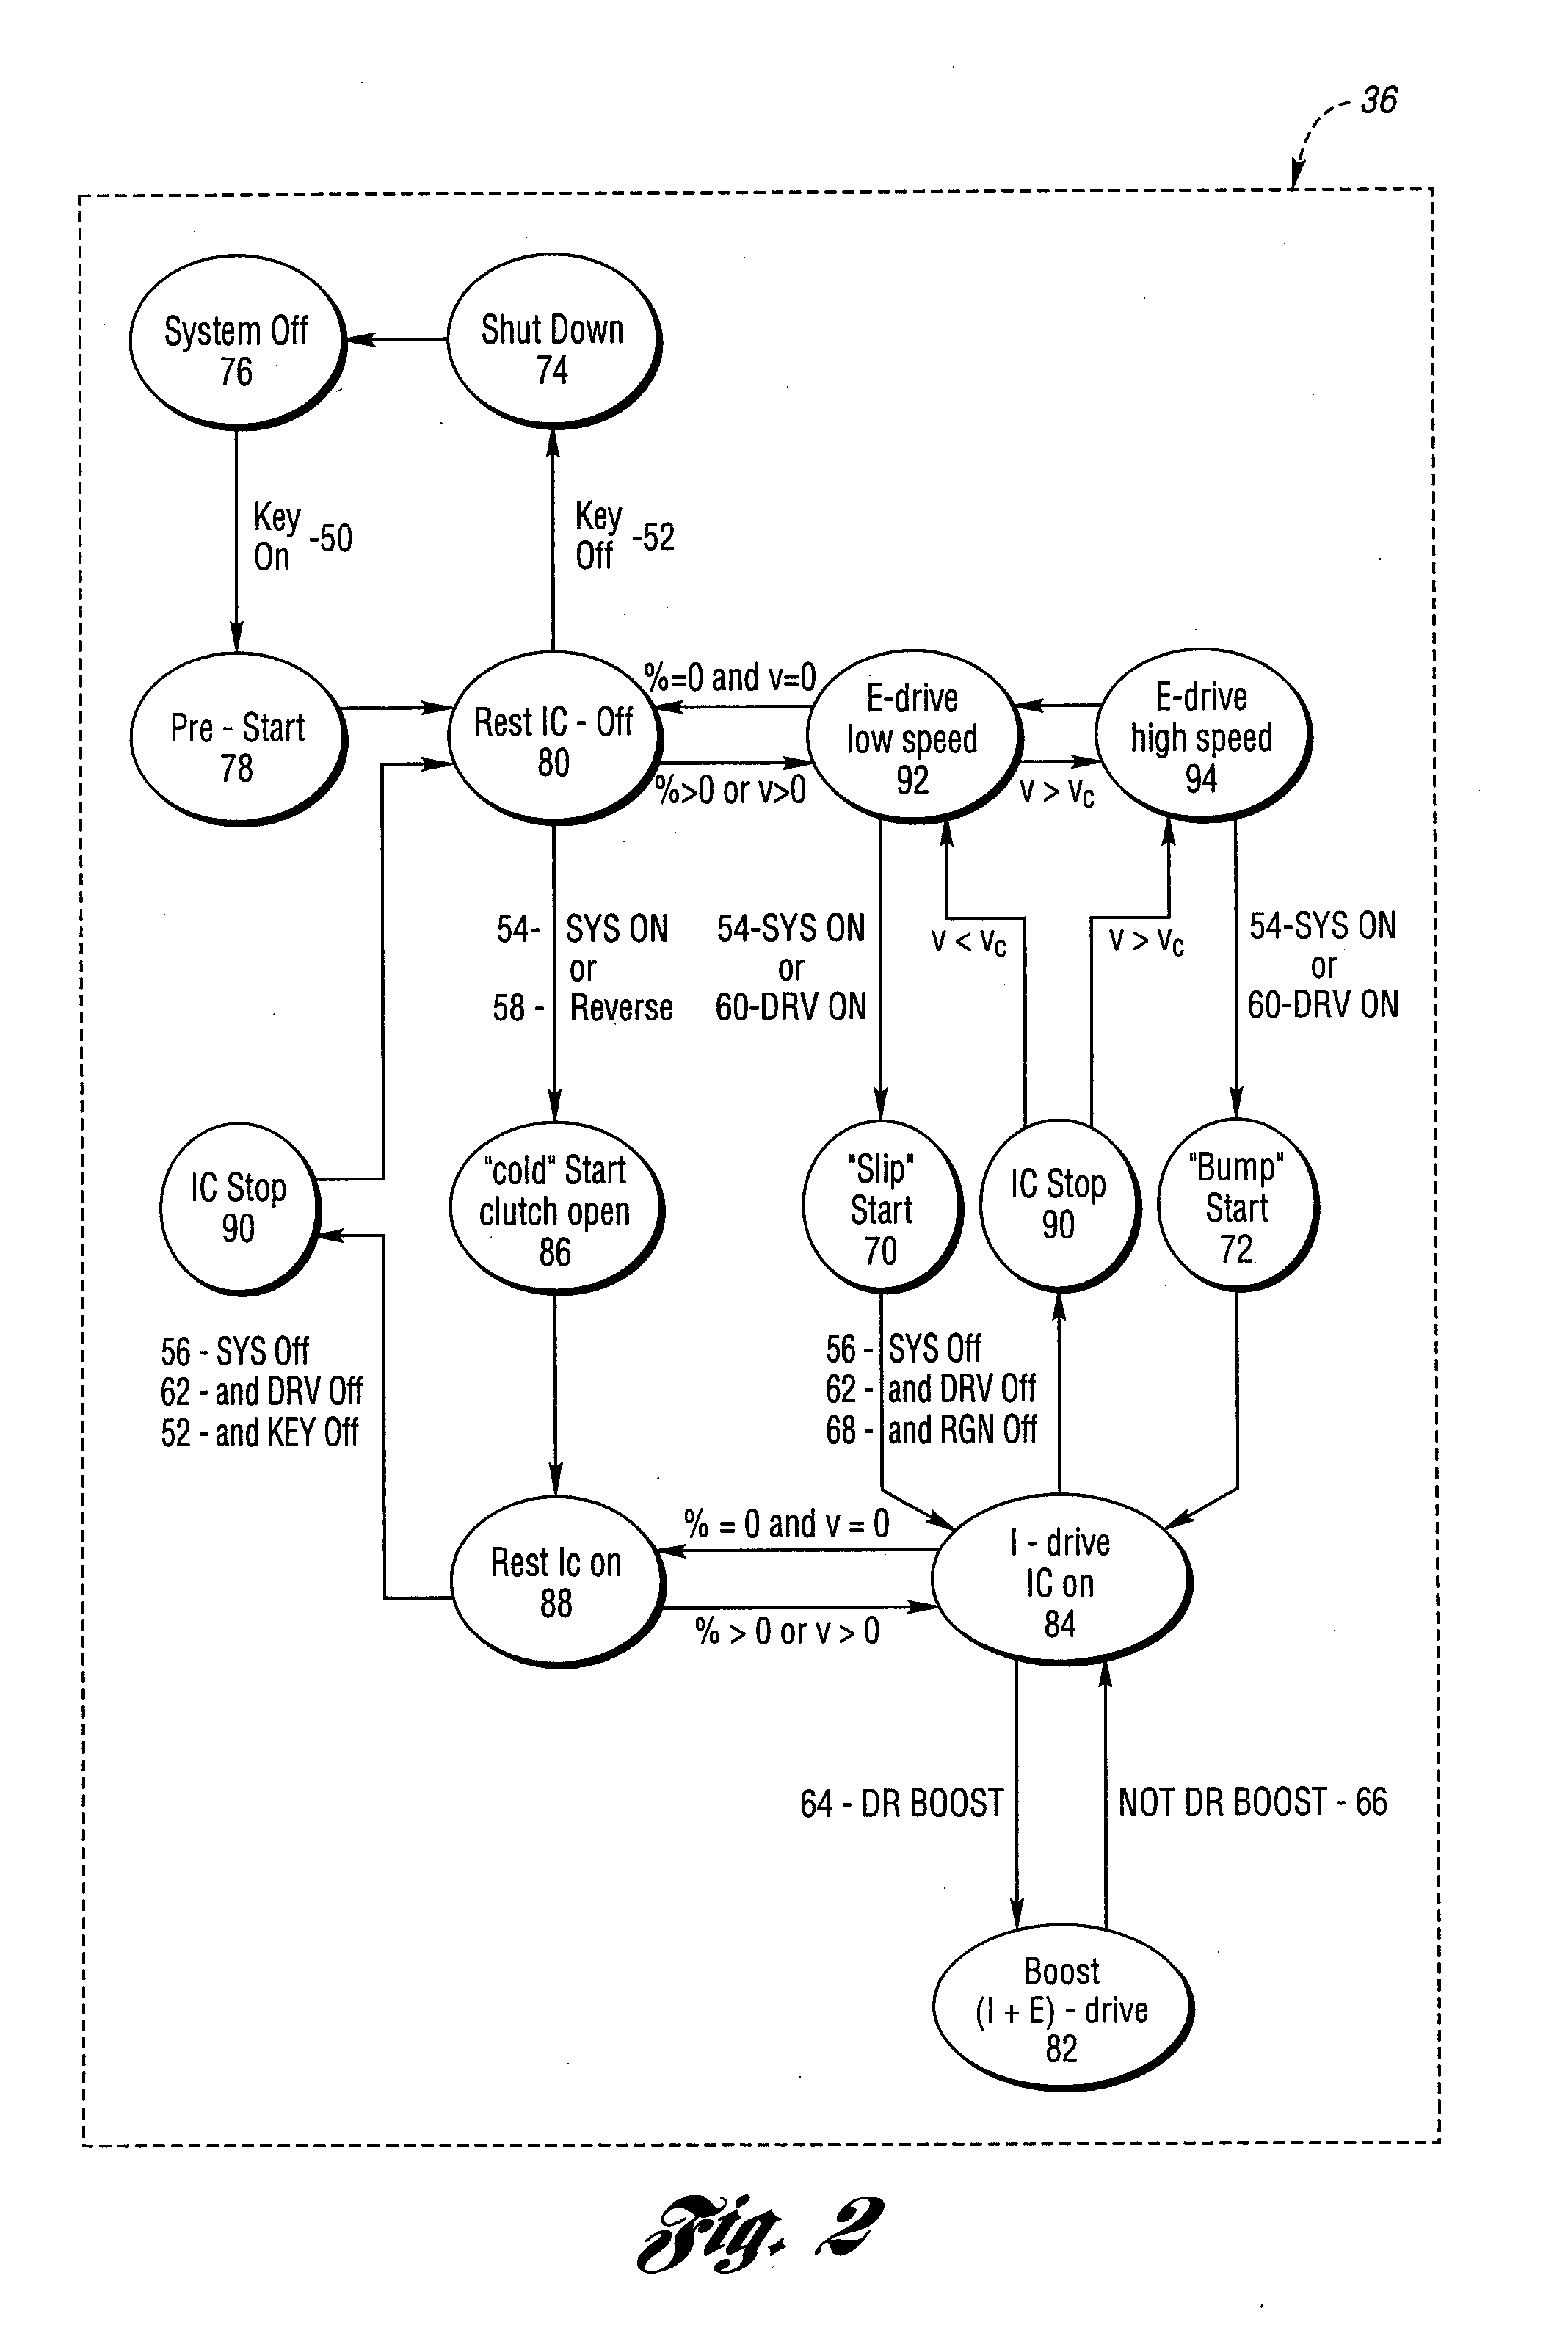 Control System for a Hybrid Electric Vehicle to Anticipate the Need for a Mode Change